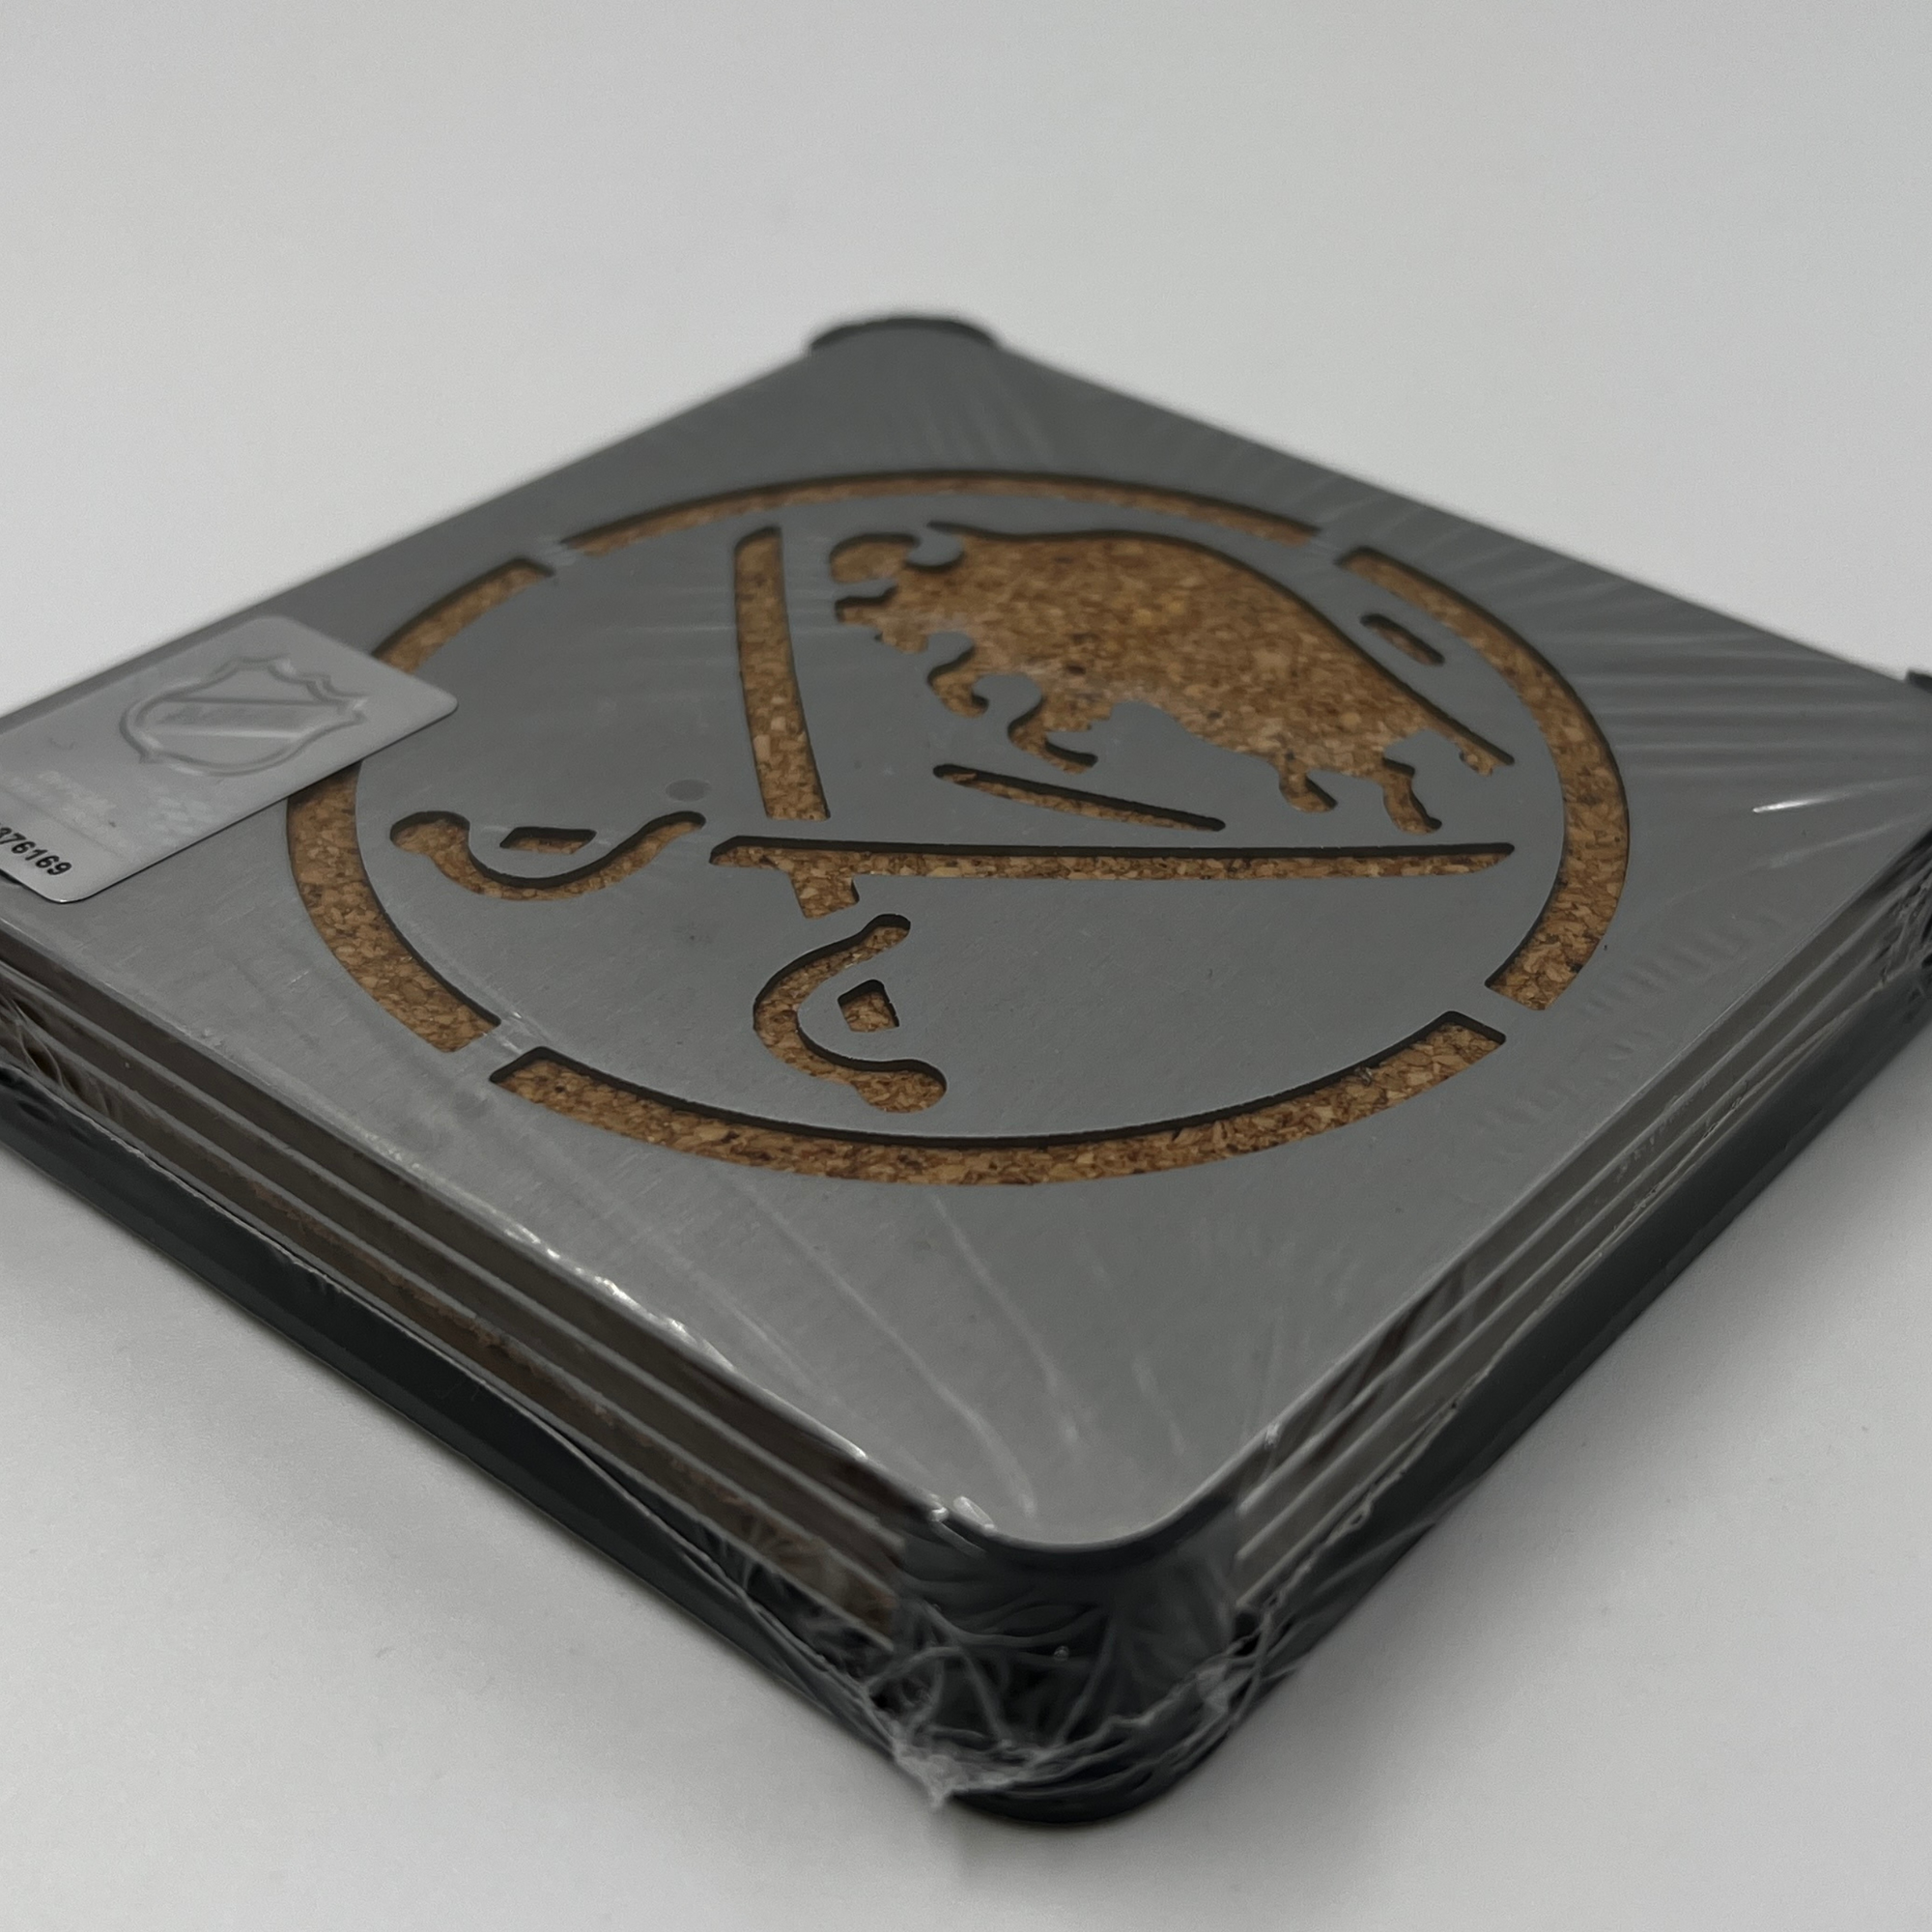 Buffalo Sabres 4-Pack Stainless Steal &amp; Cork Coasters